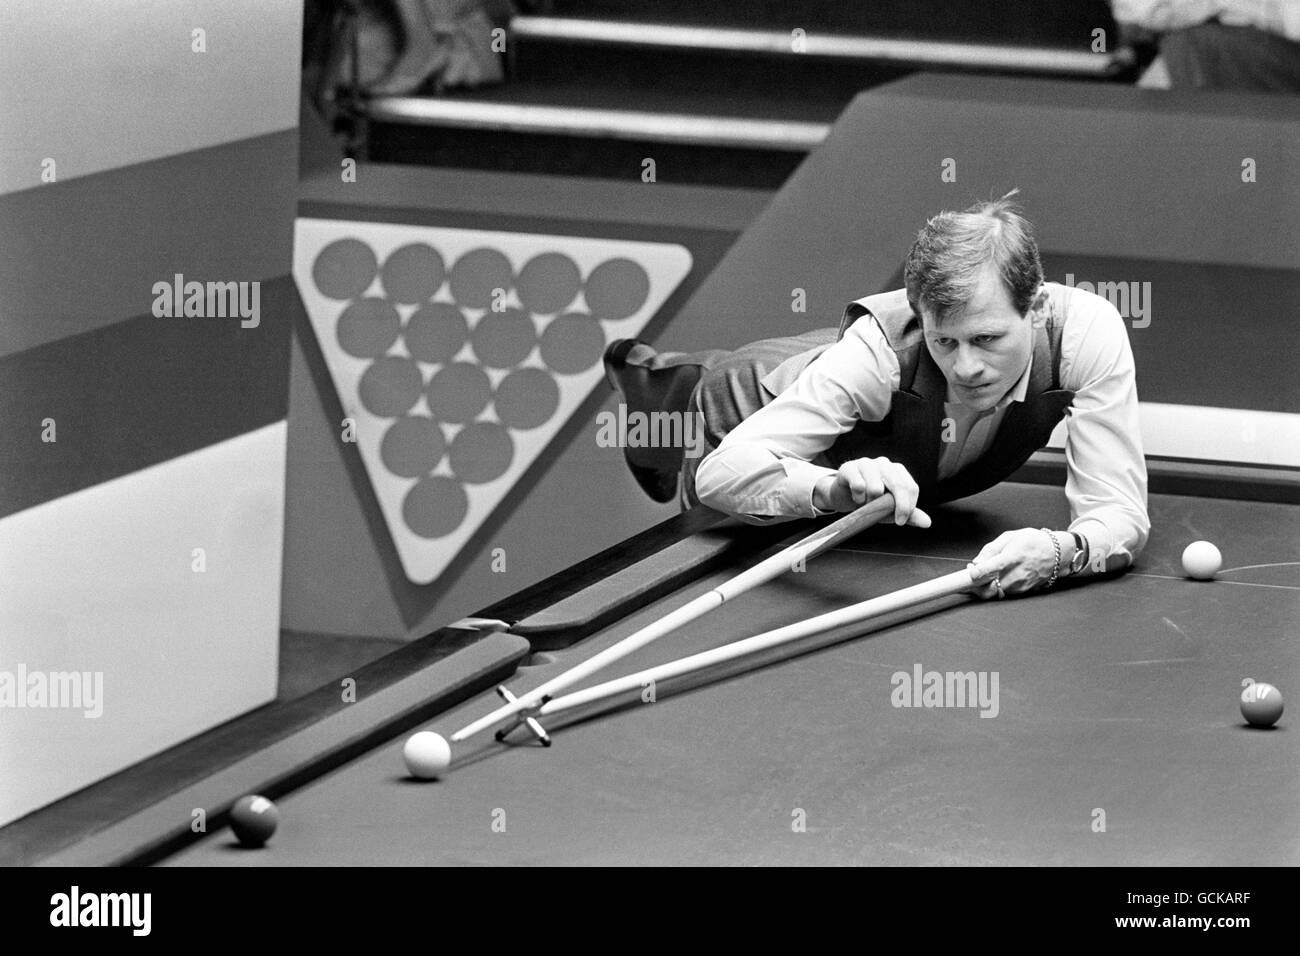 Snooker - Embassy World Professional Snooker Championship - Second Round - Alex Higgins v Terry Griffiths - Crucible Theatre Stock Photo